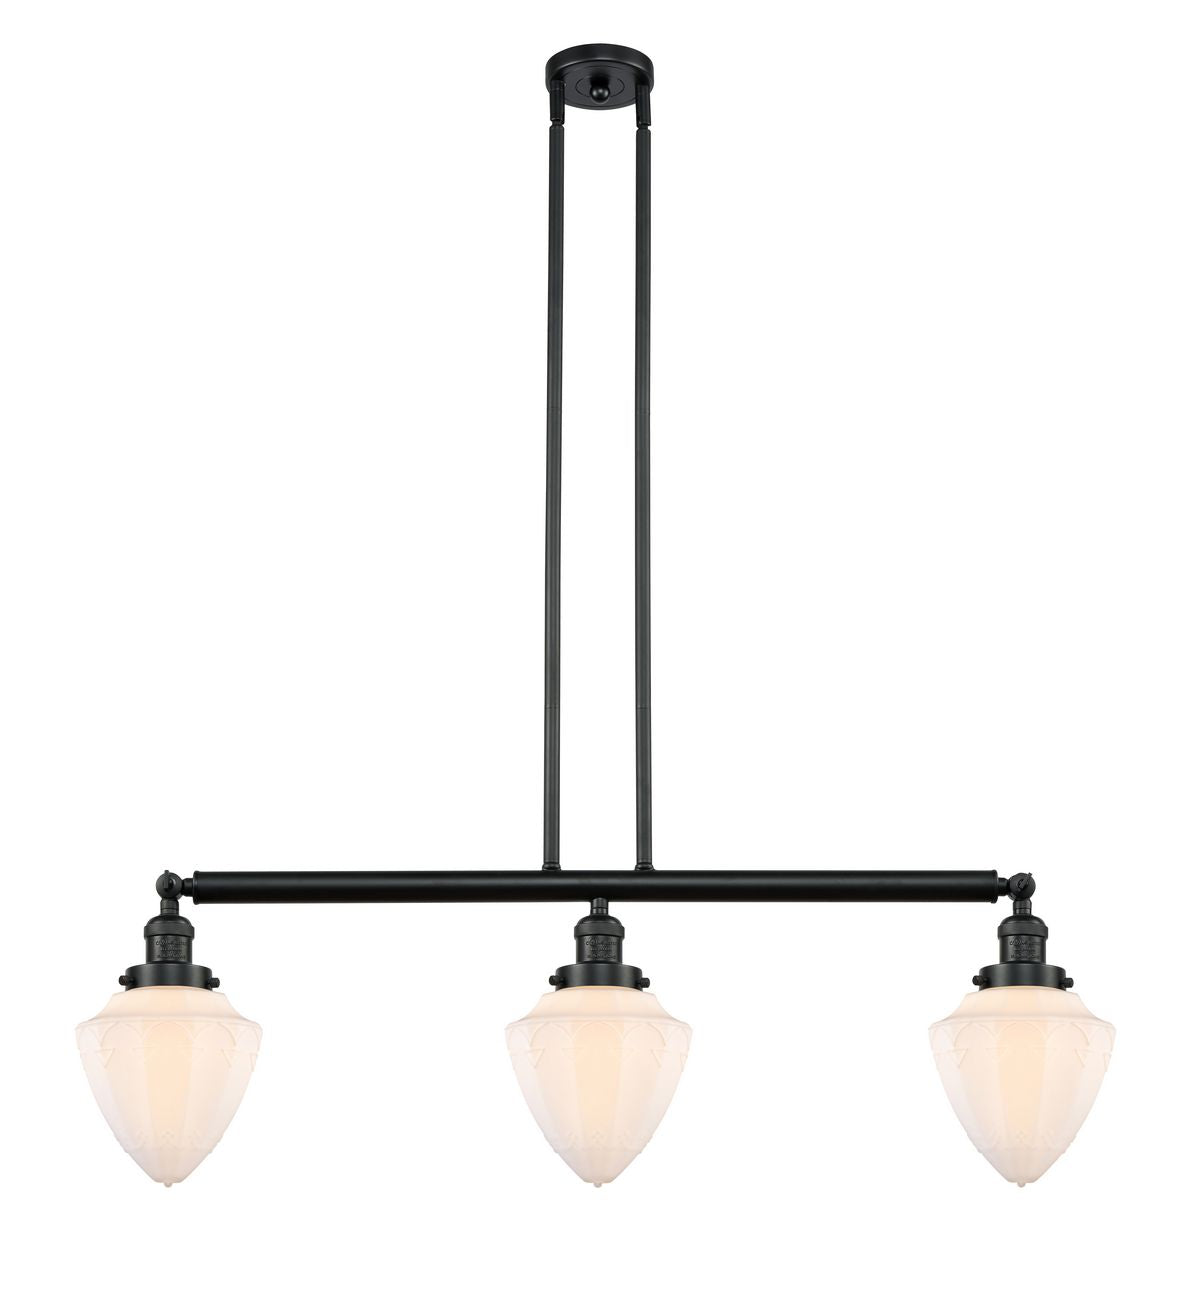 213-BK-G661-7 3-Light 38" Matte Black Island Light - Matte White Cased Small Bullet Glass - LED Bulb - Dimmensions: 38 x 7 x 15.25<br>Minimum Height : 24.25<br>Maximum Height : 48.25 - Sloped Ceiling Compatible: Yes